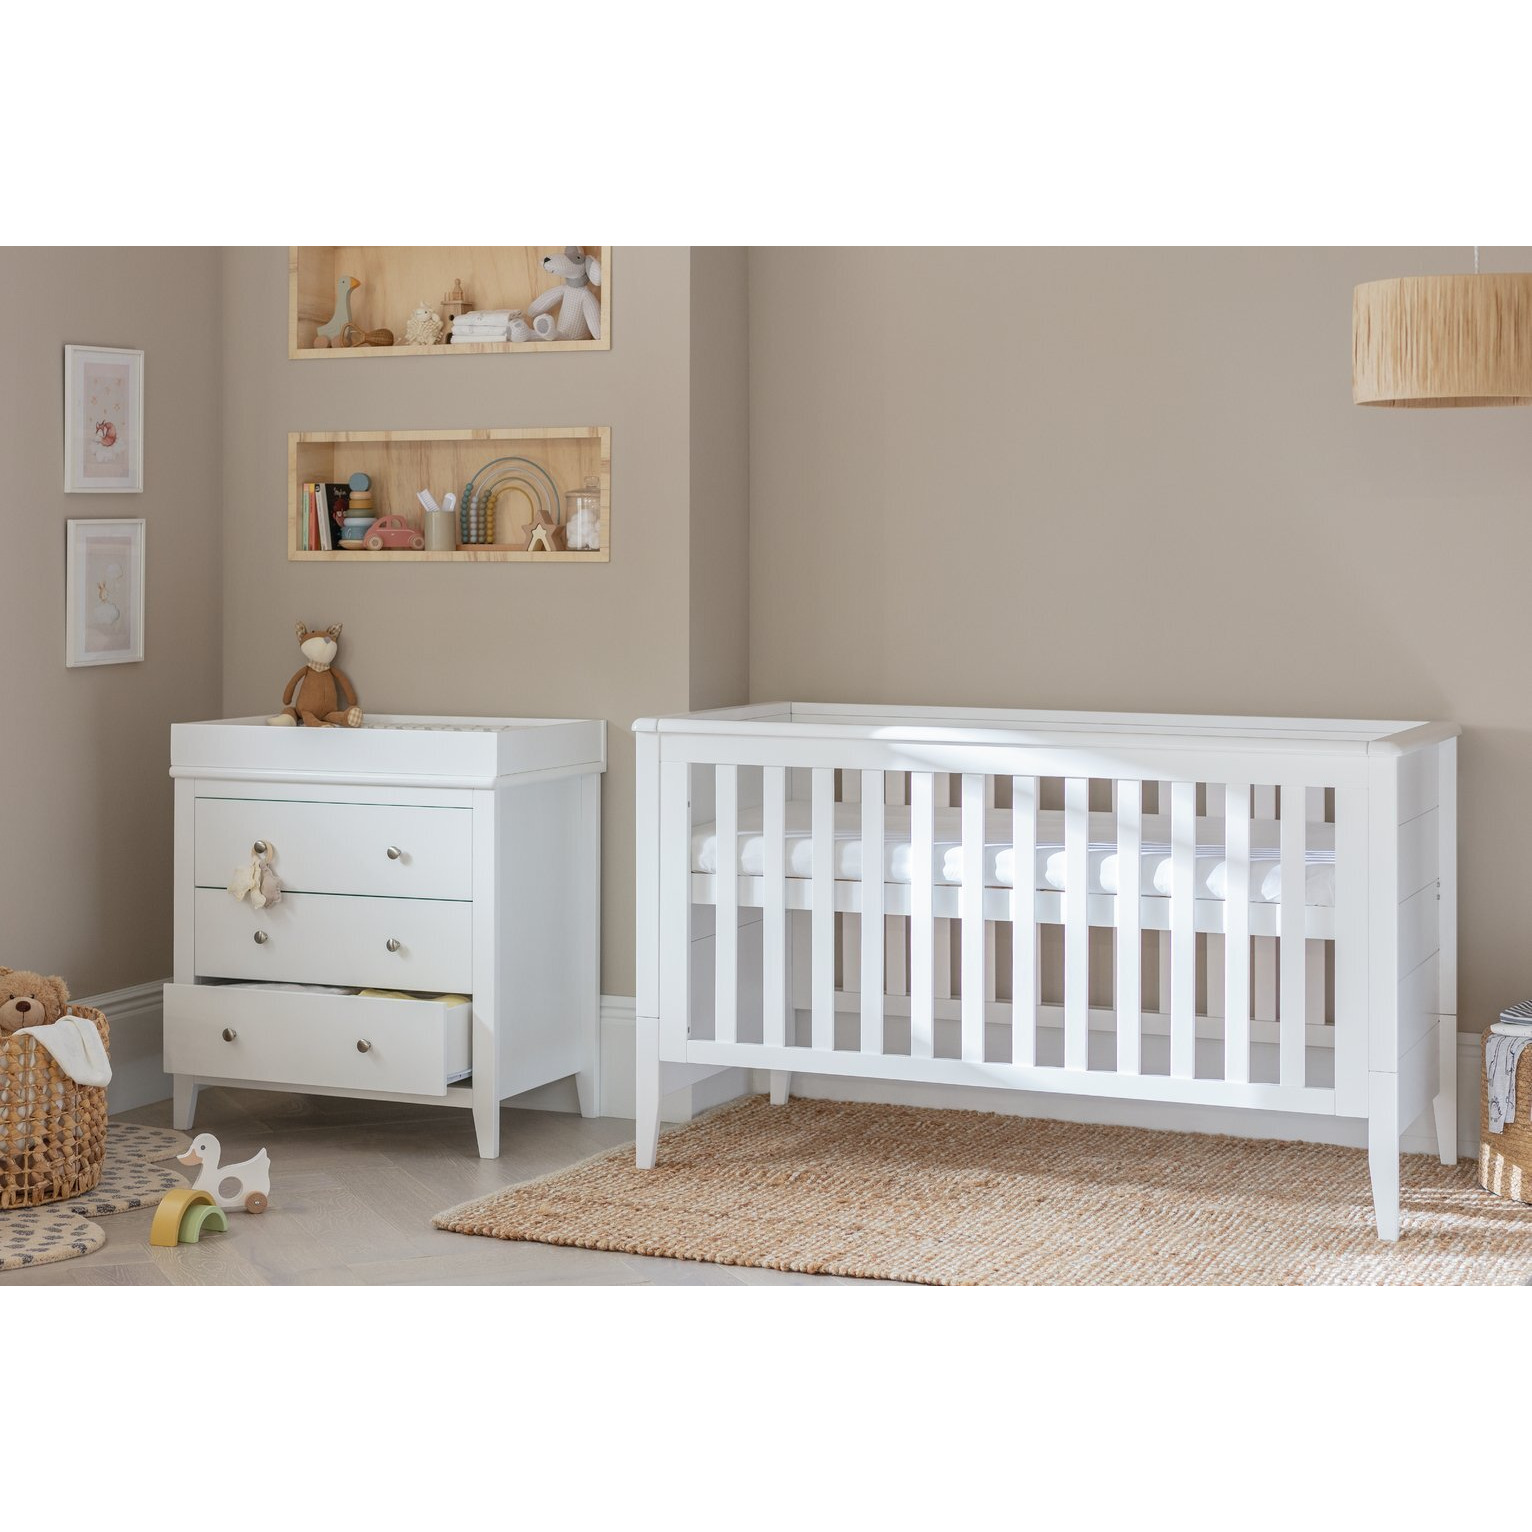 Cuggl Canterbury Cot Bed and Dresser Nursery Set - White - image 1